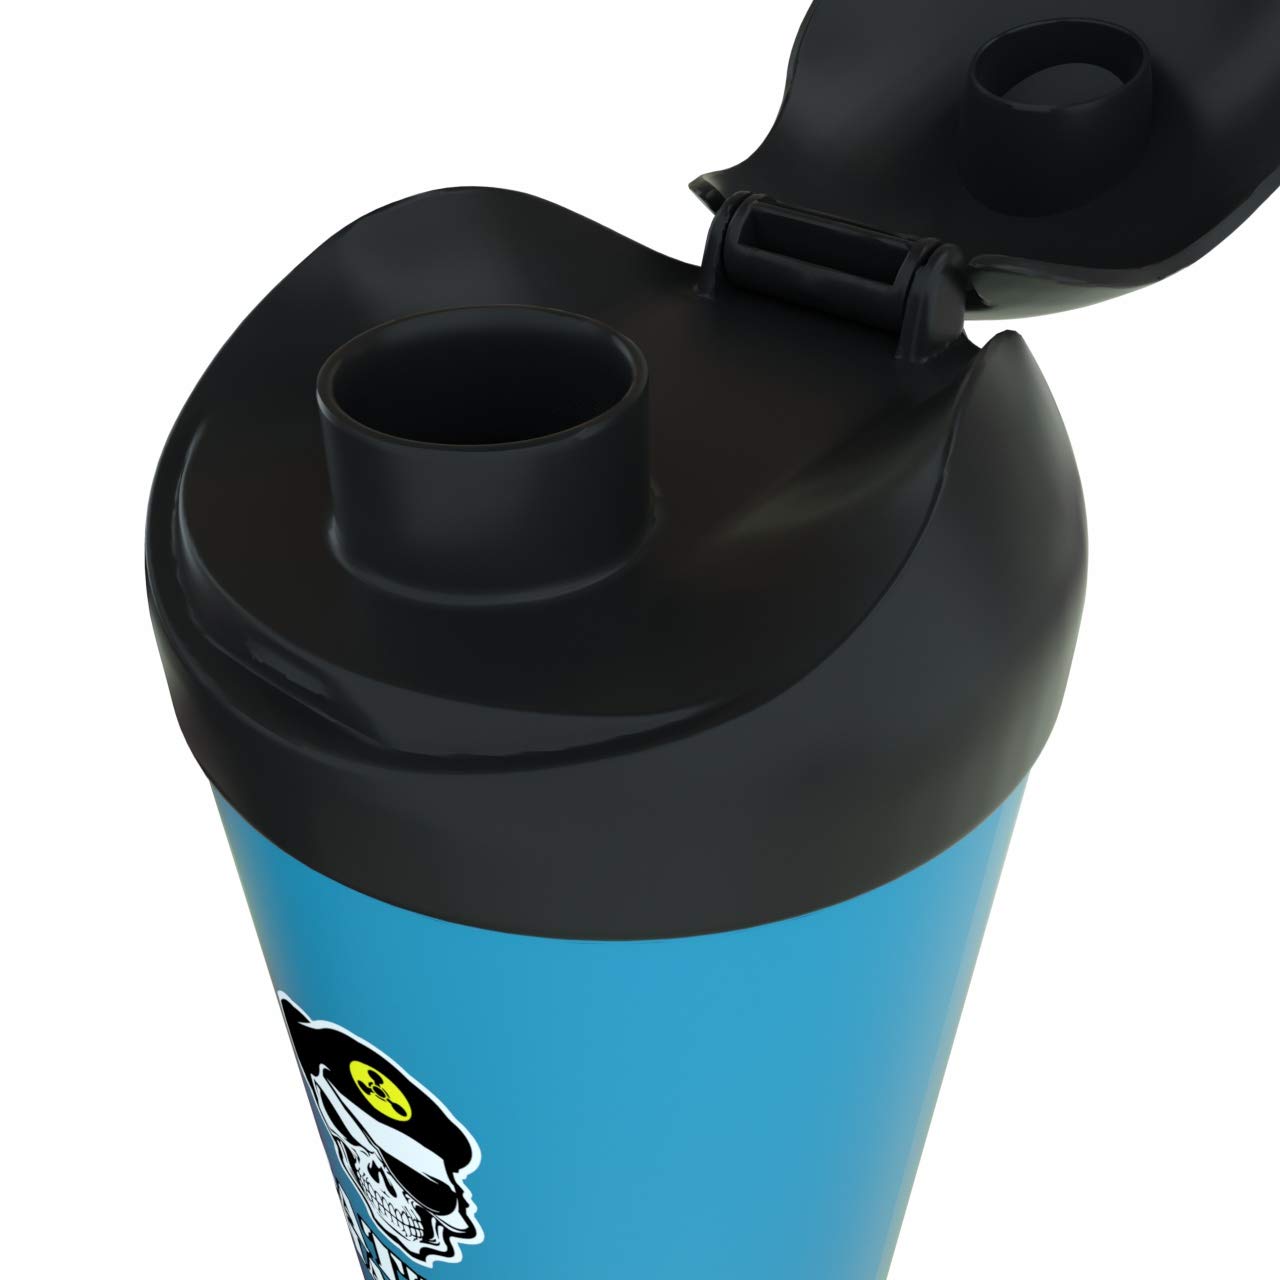 Battle Shakers Mortar Shaker Cup | Military Themed Shaker Bottle | Leak-Proof Protein Cup with Storage Compartment | Mix Protein Powders & More | Durable & Dishwasher Safe | 20 Oz Blue/Black